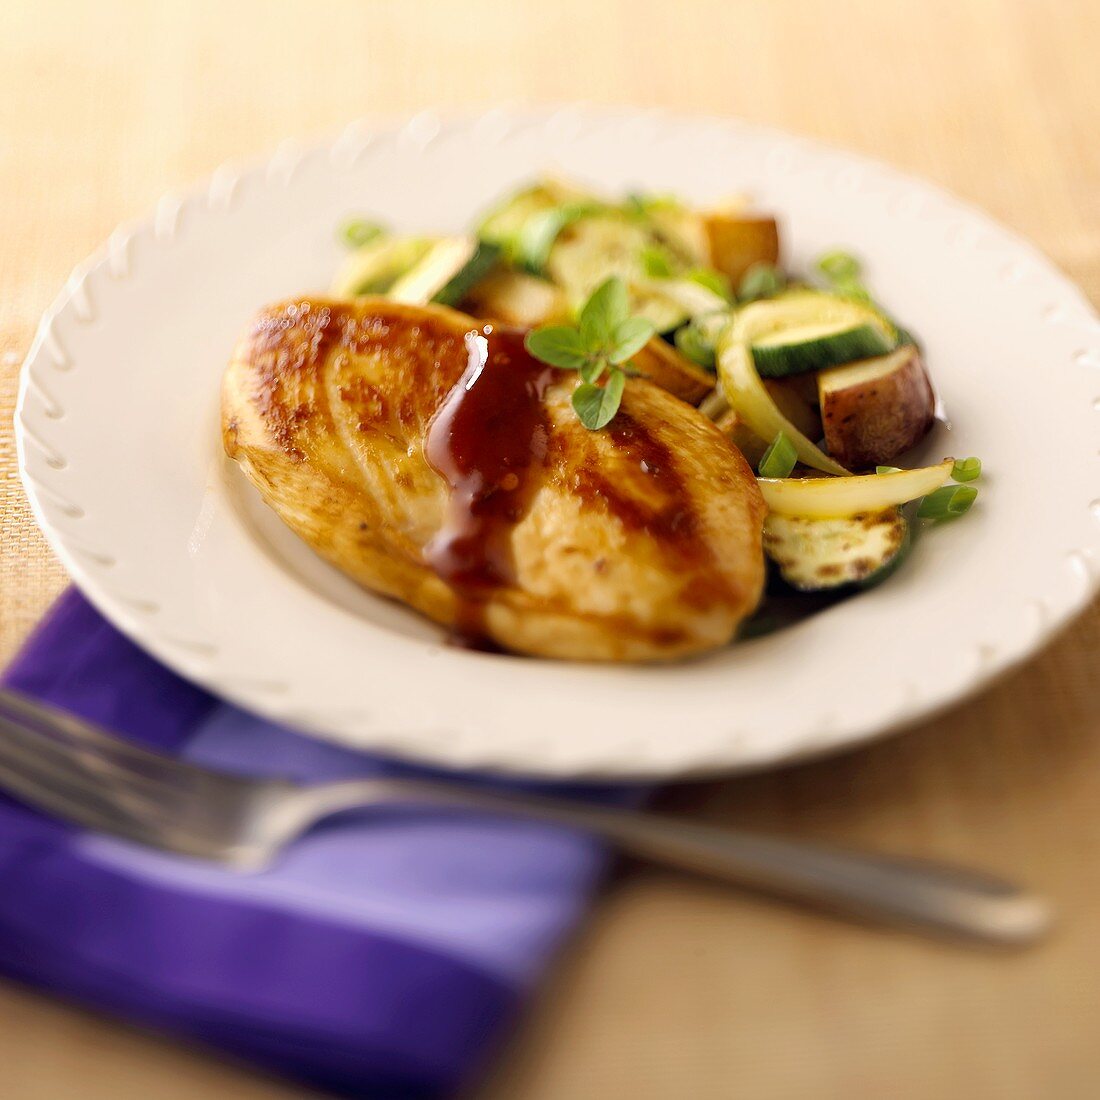 A Chicken Breast with Mixed Veggies